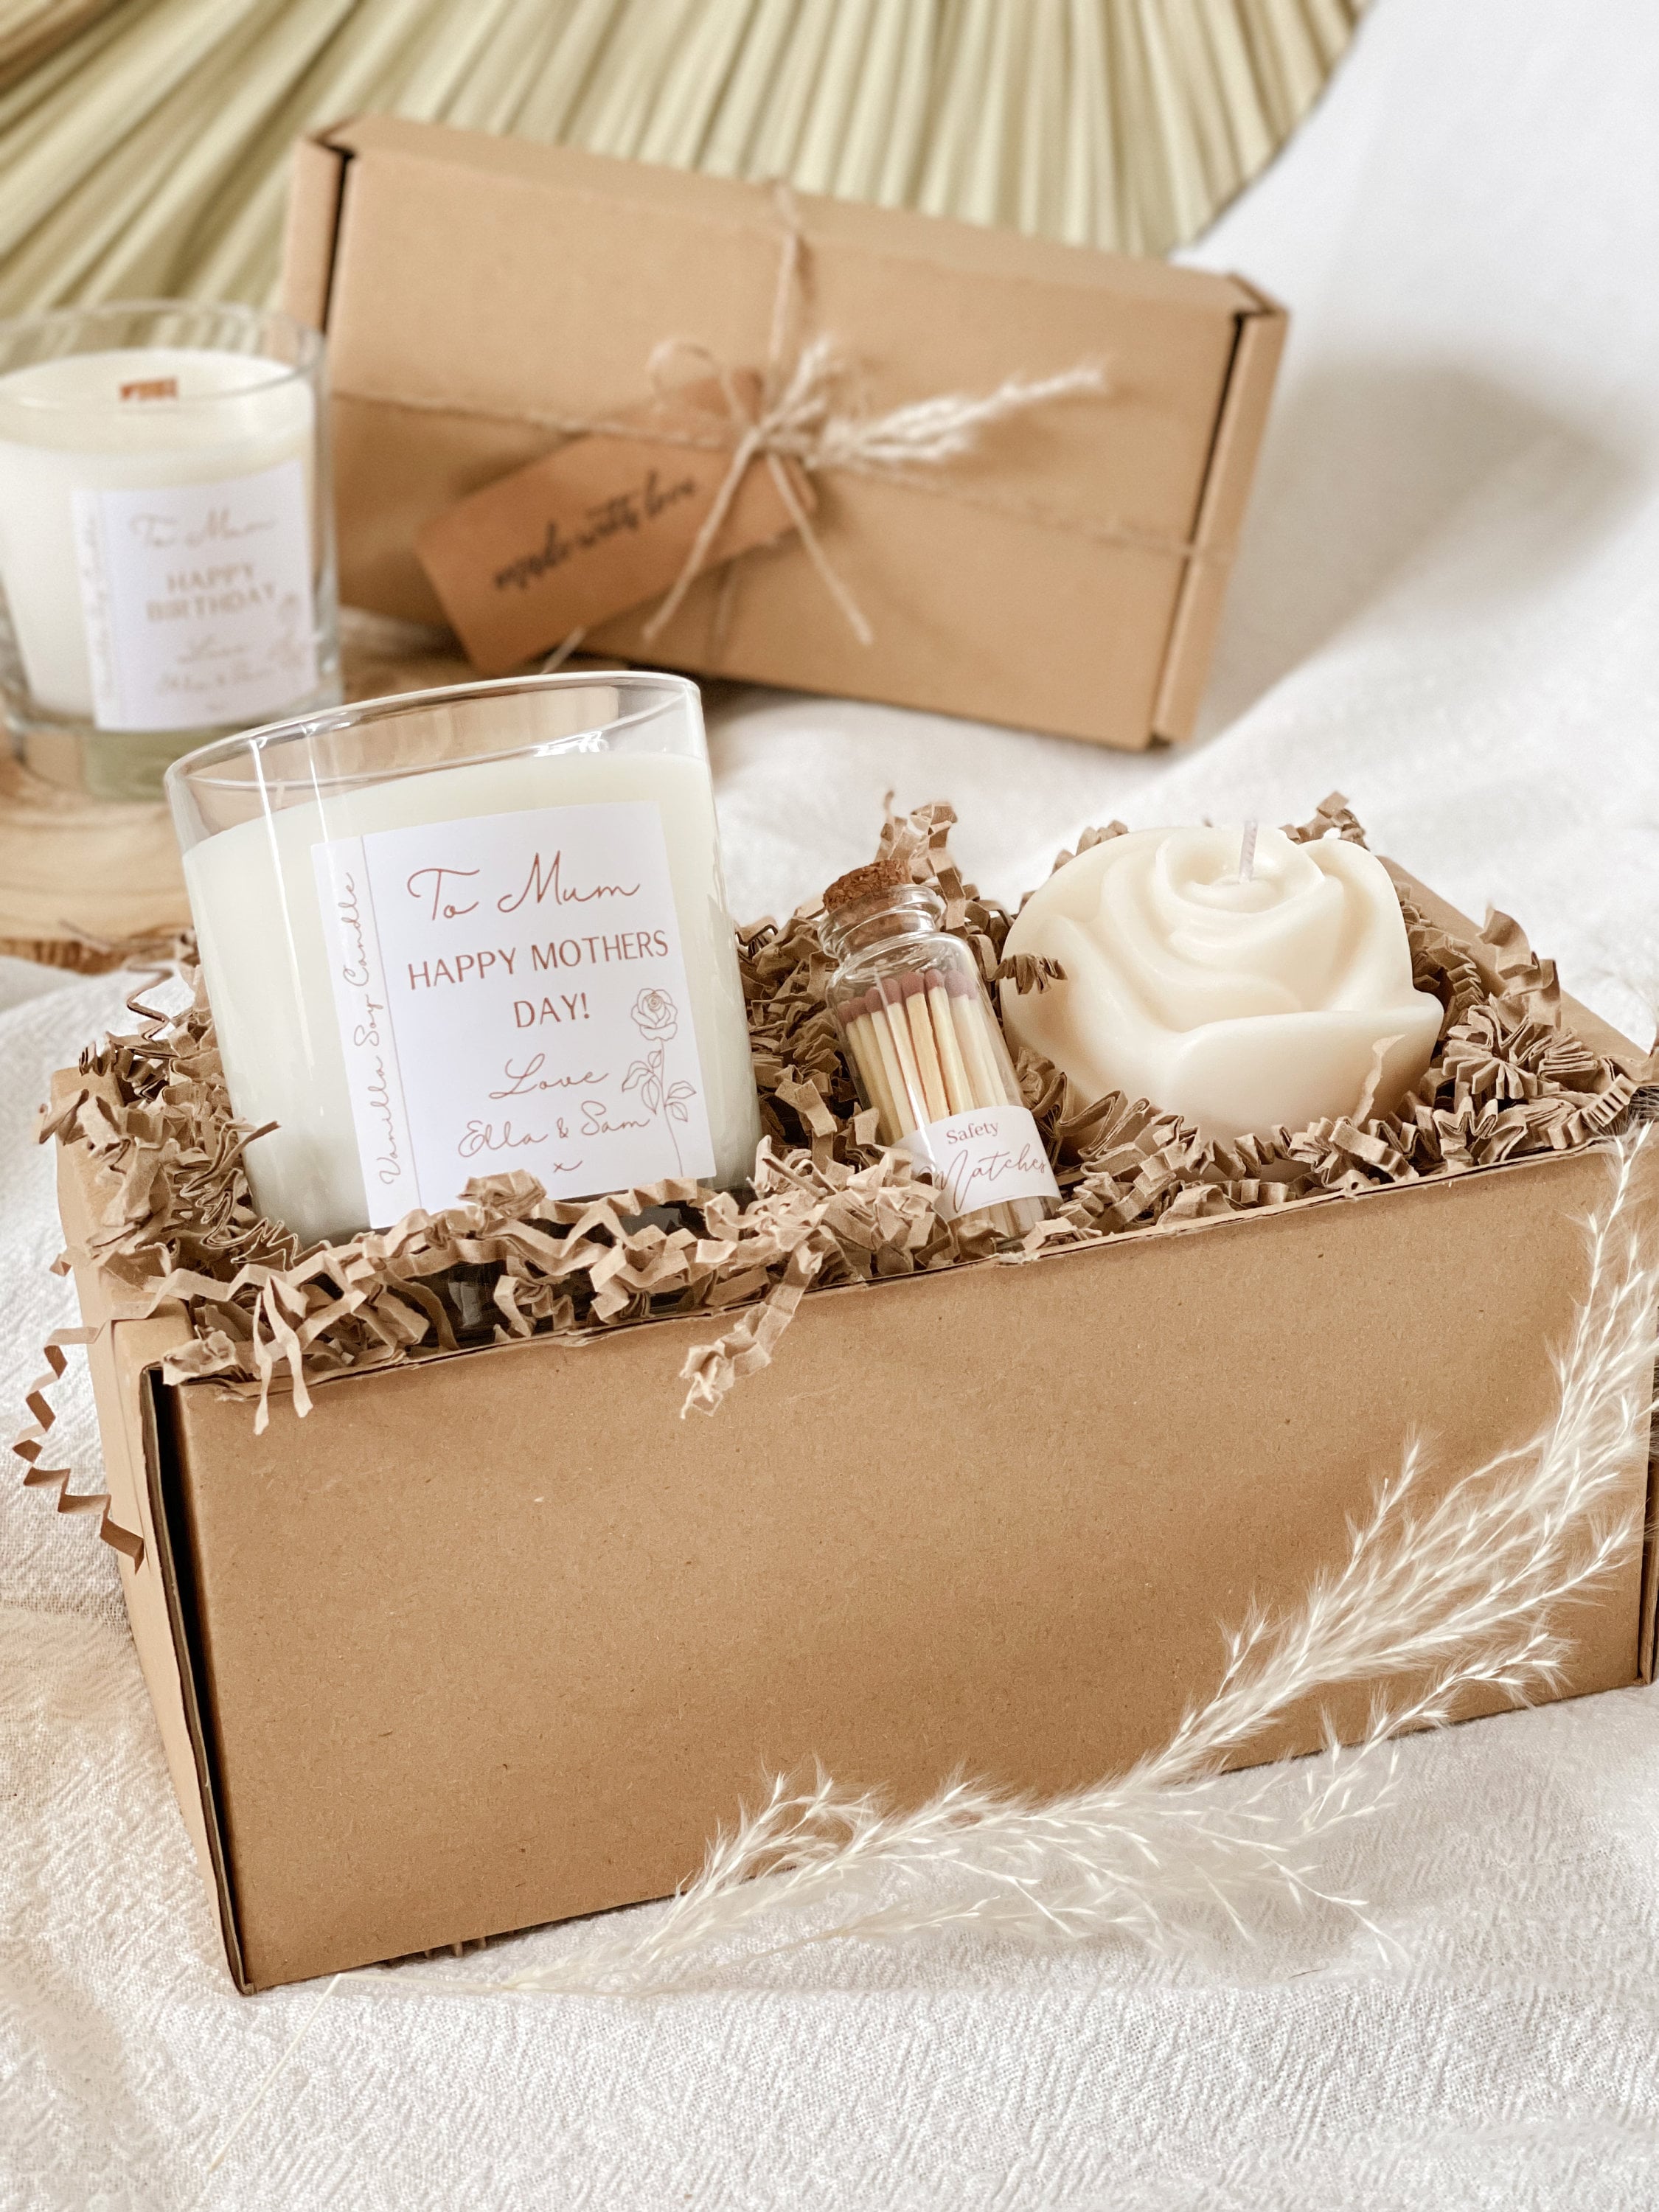 Mama & Baby Bear Gift Box Cute Gift Box Mother's Day Giftgift for Mum Cute  Teddy Bear Candle Mother's Day Gift Box Soy Candle Beeswax 